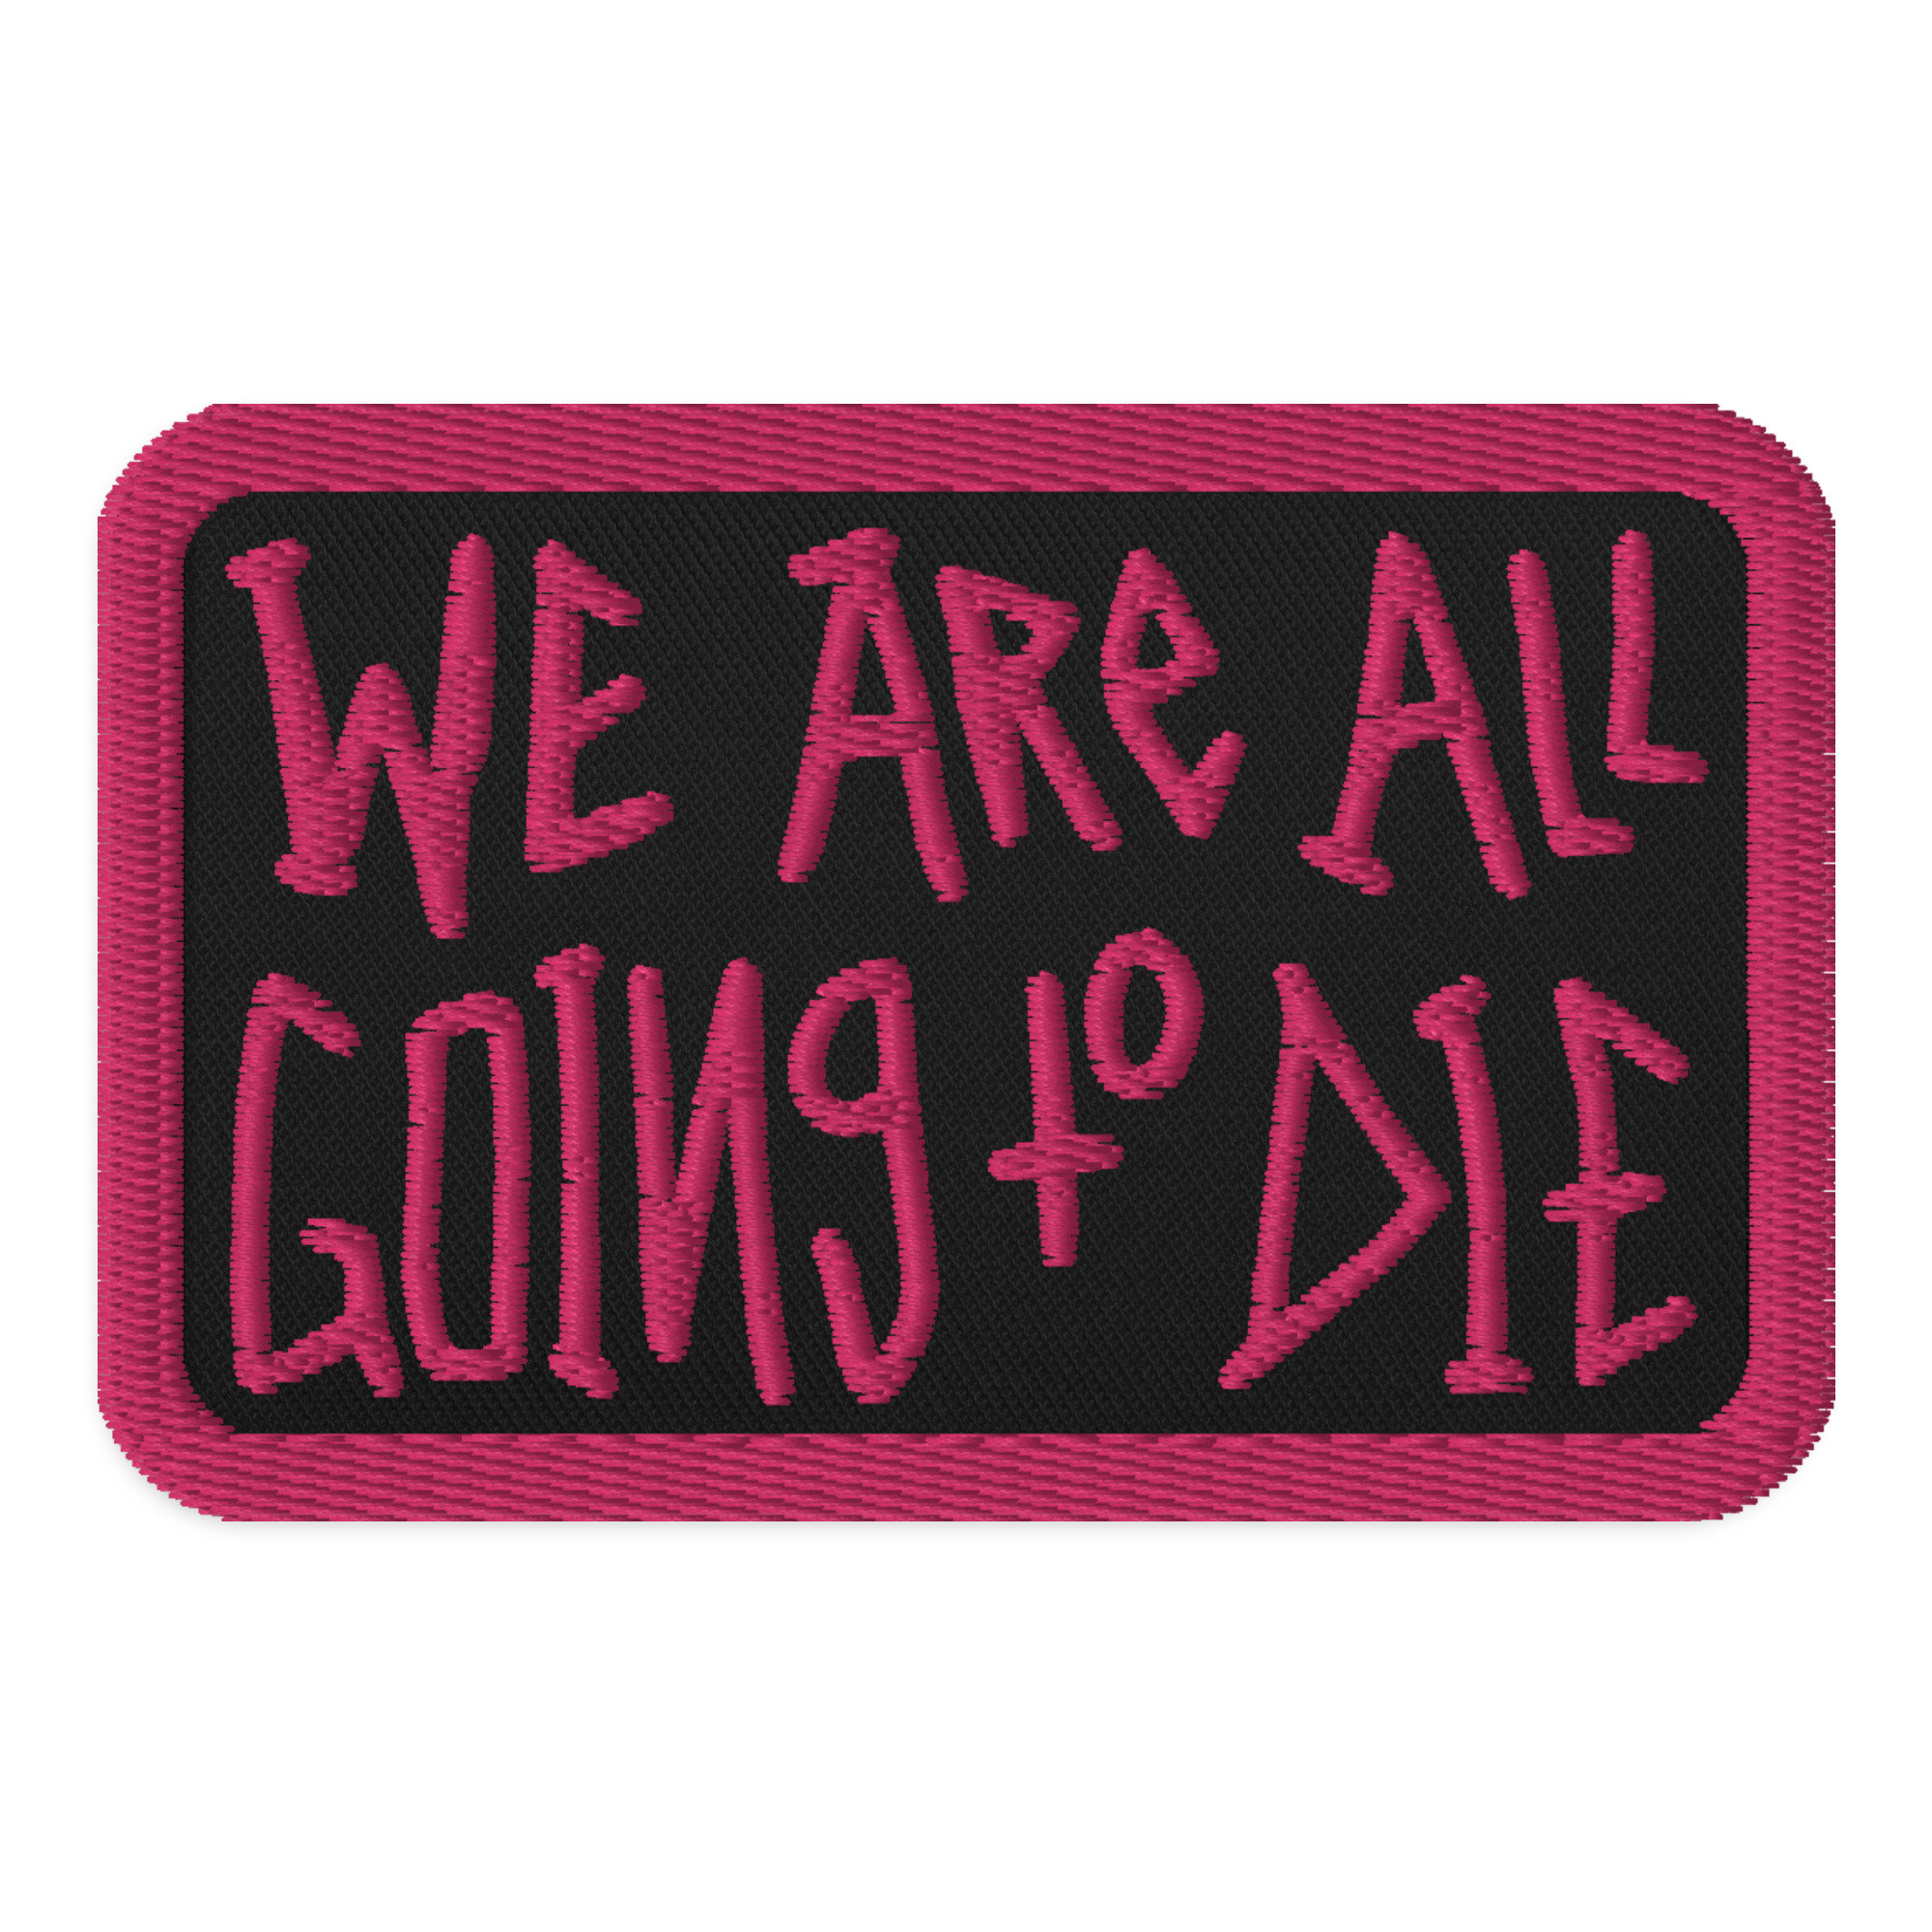 Featured image for “We are all going to die - Embroidered patches”